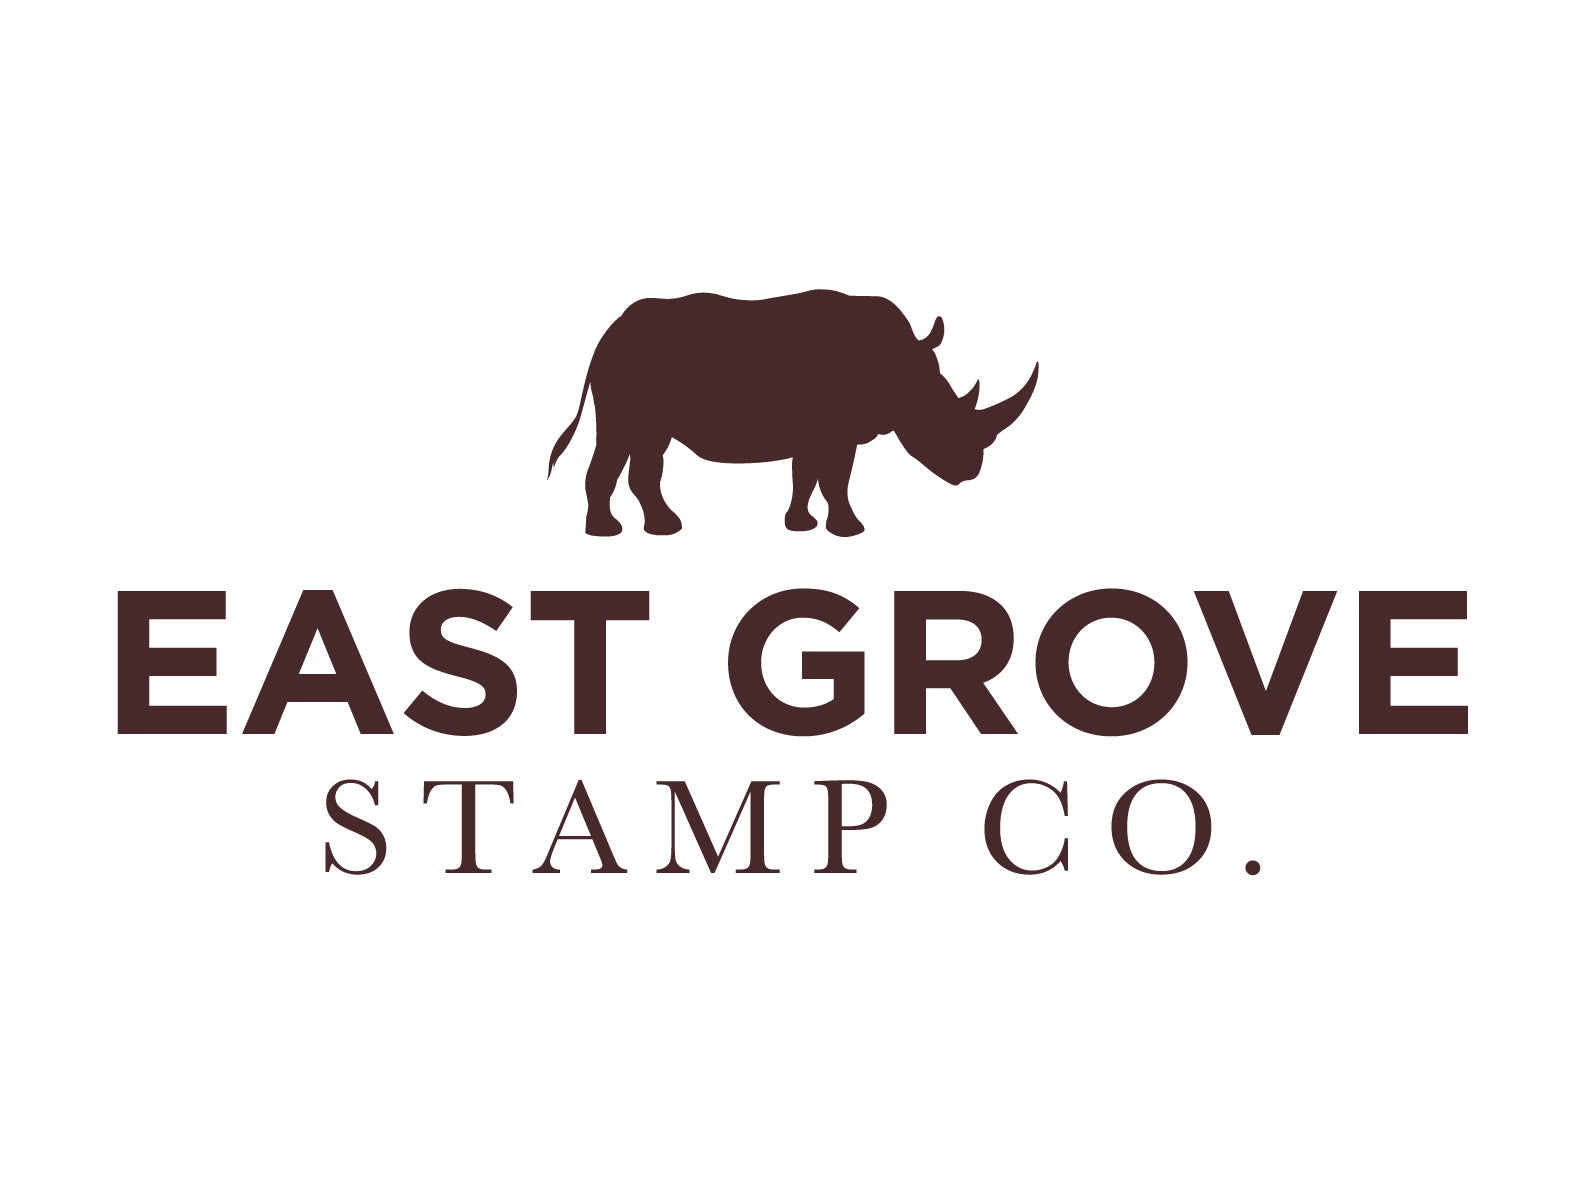 East Grove Stamp Co.